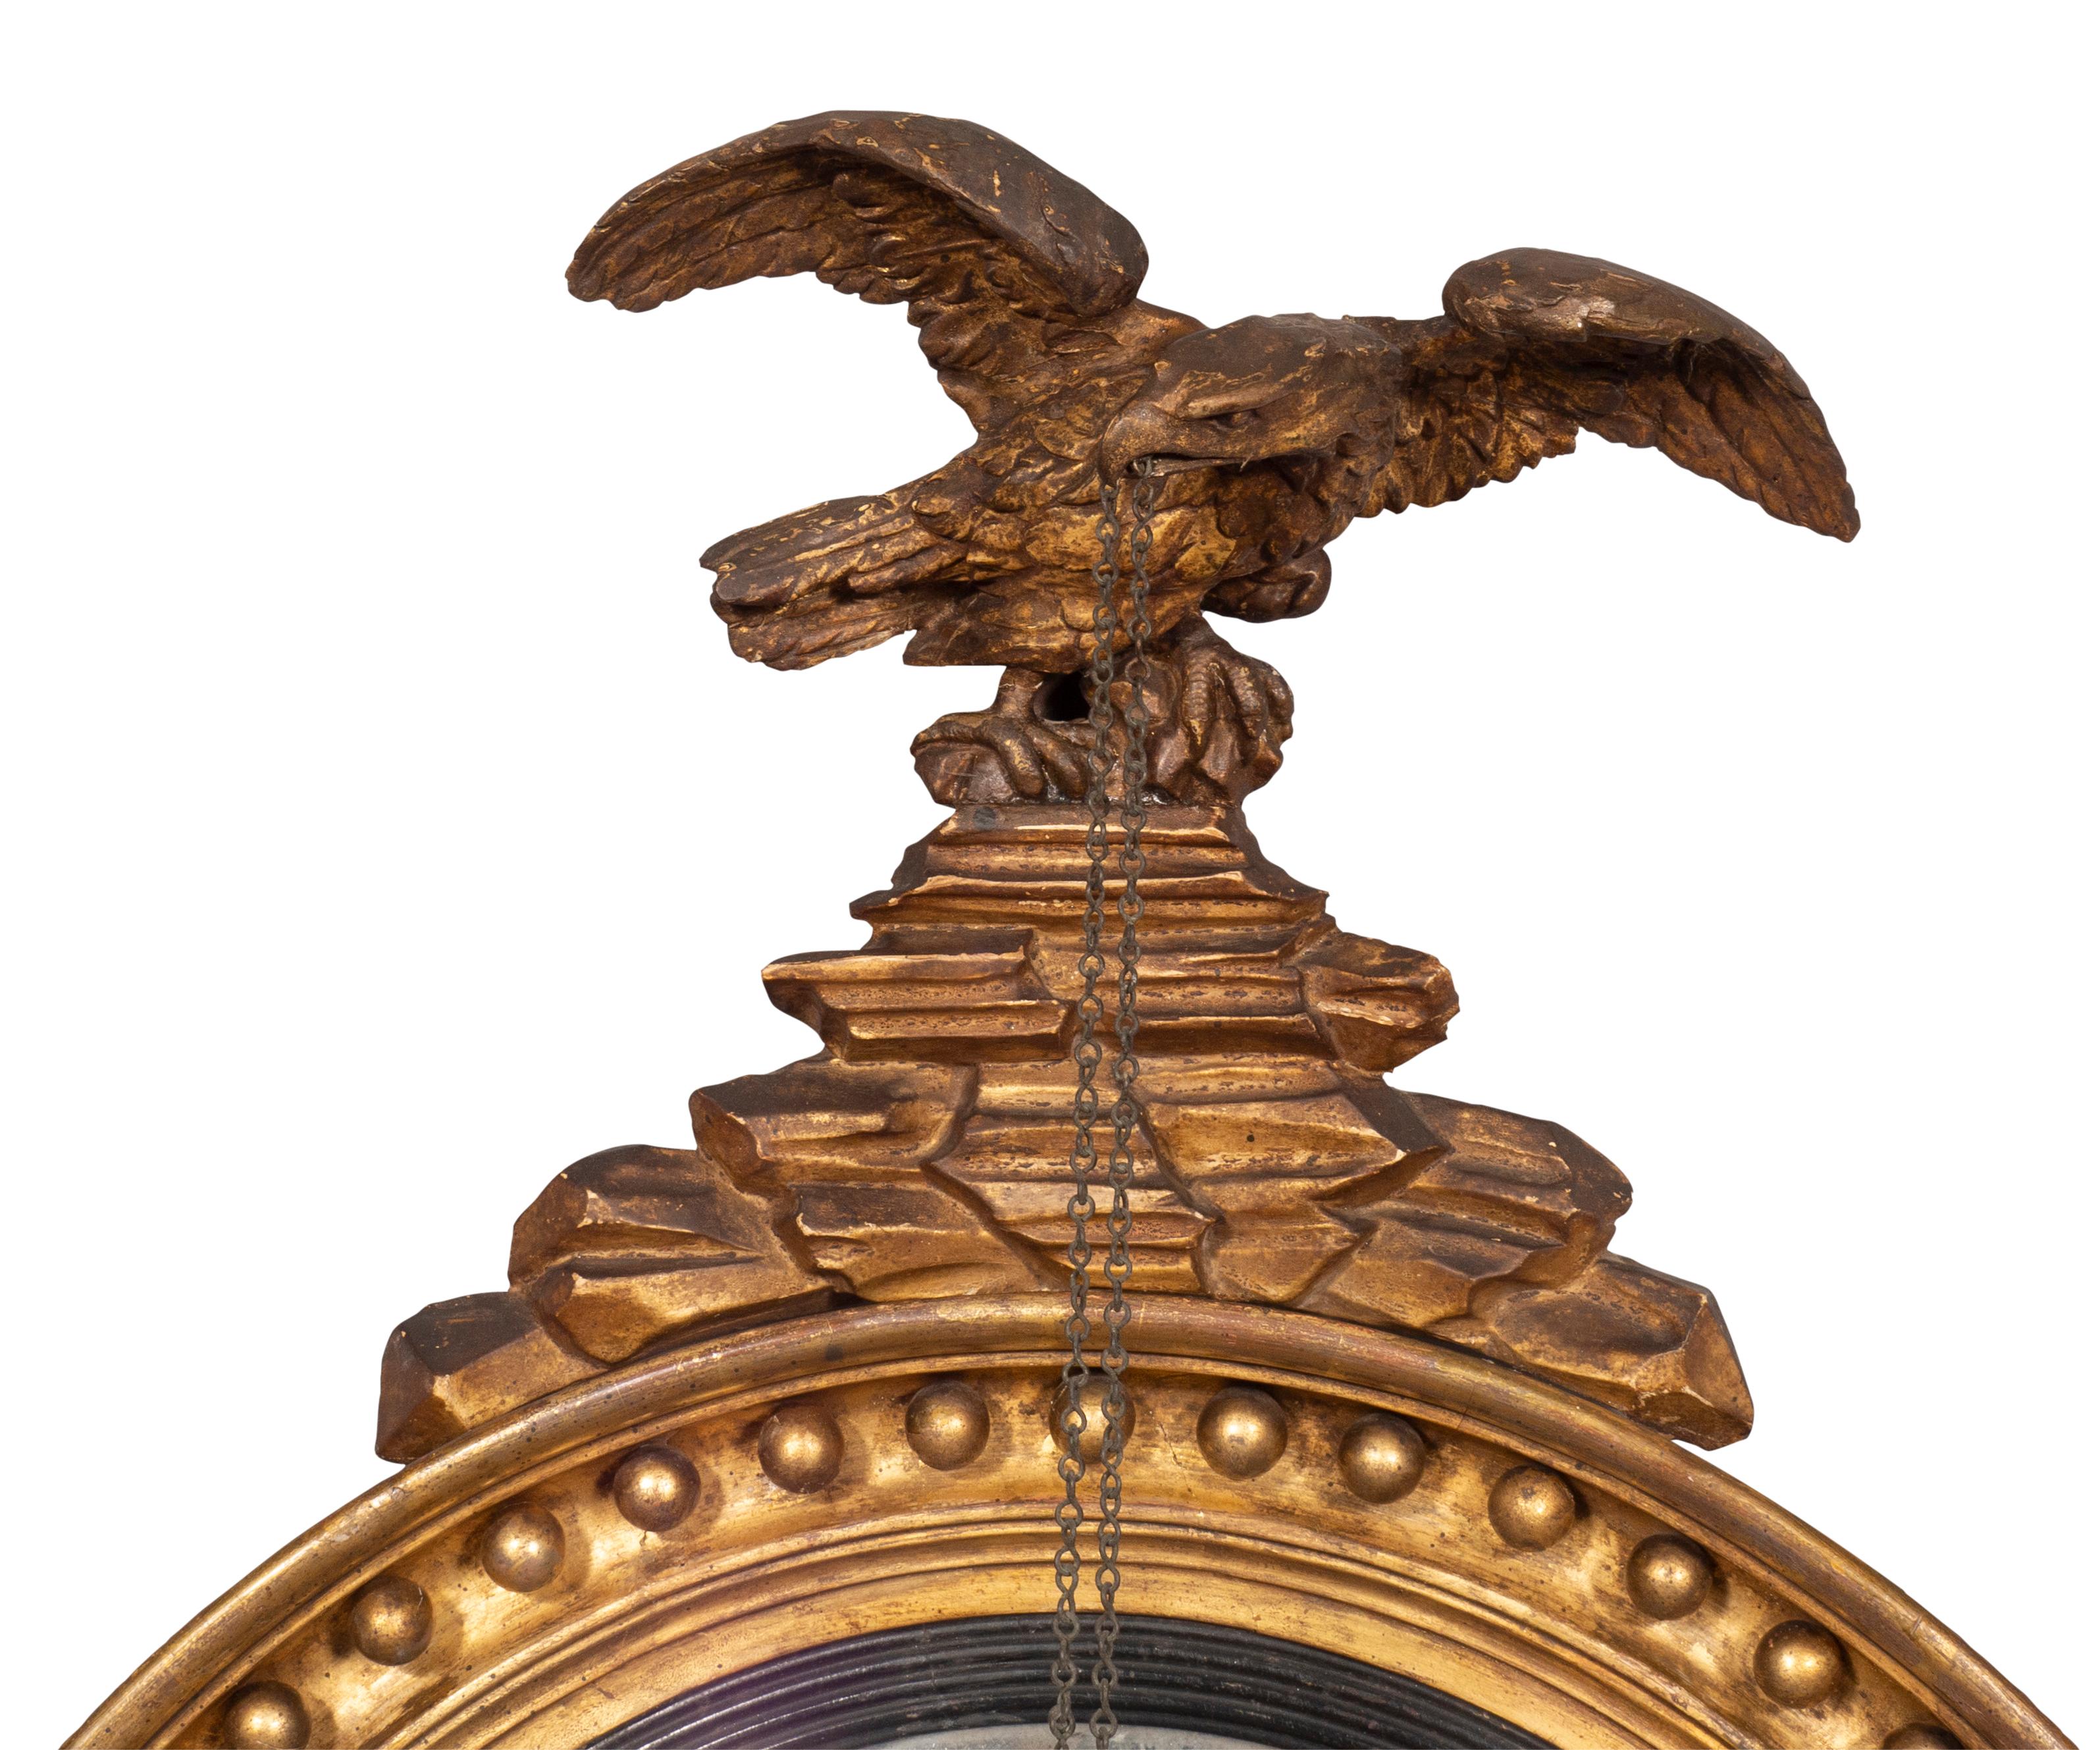 With eagle crest. The eagle holding a chain in its beak suspending two spheres. Circular mirror frame with spherules and central convex glass. Original glass with oxidation. Original gilded surface.